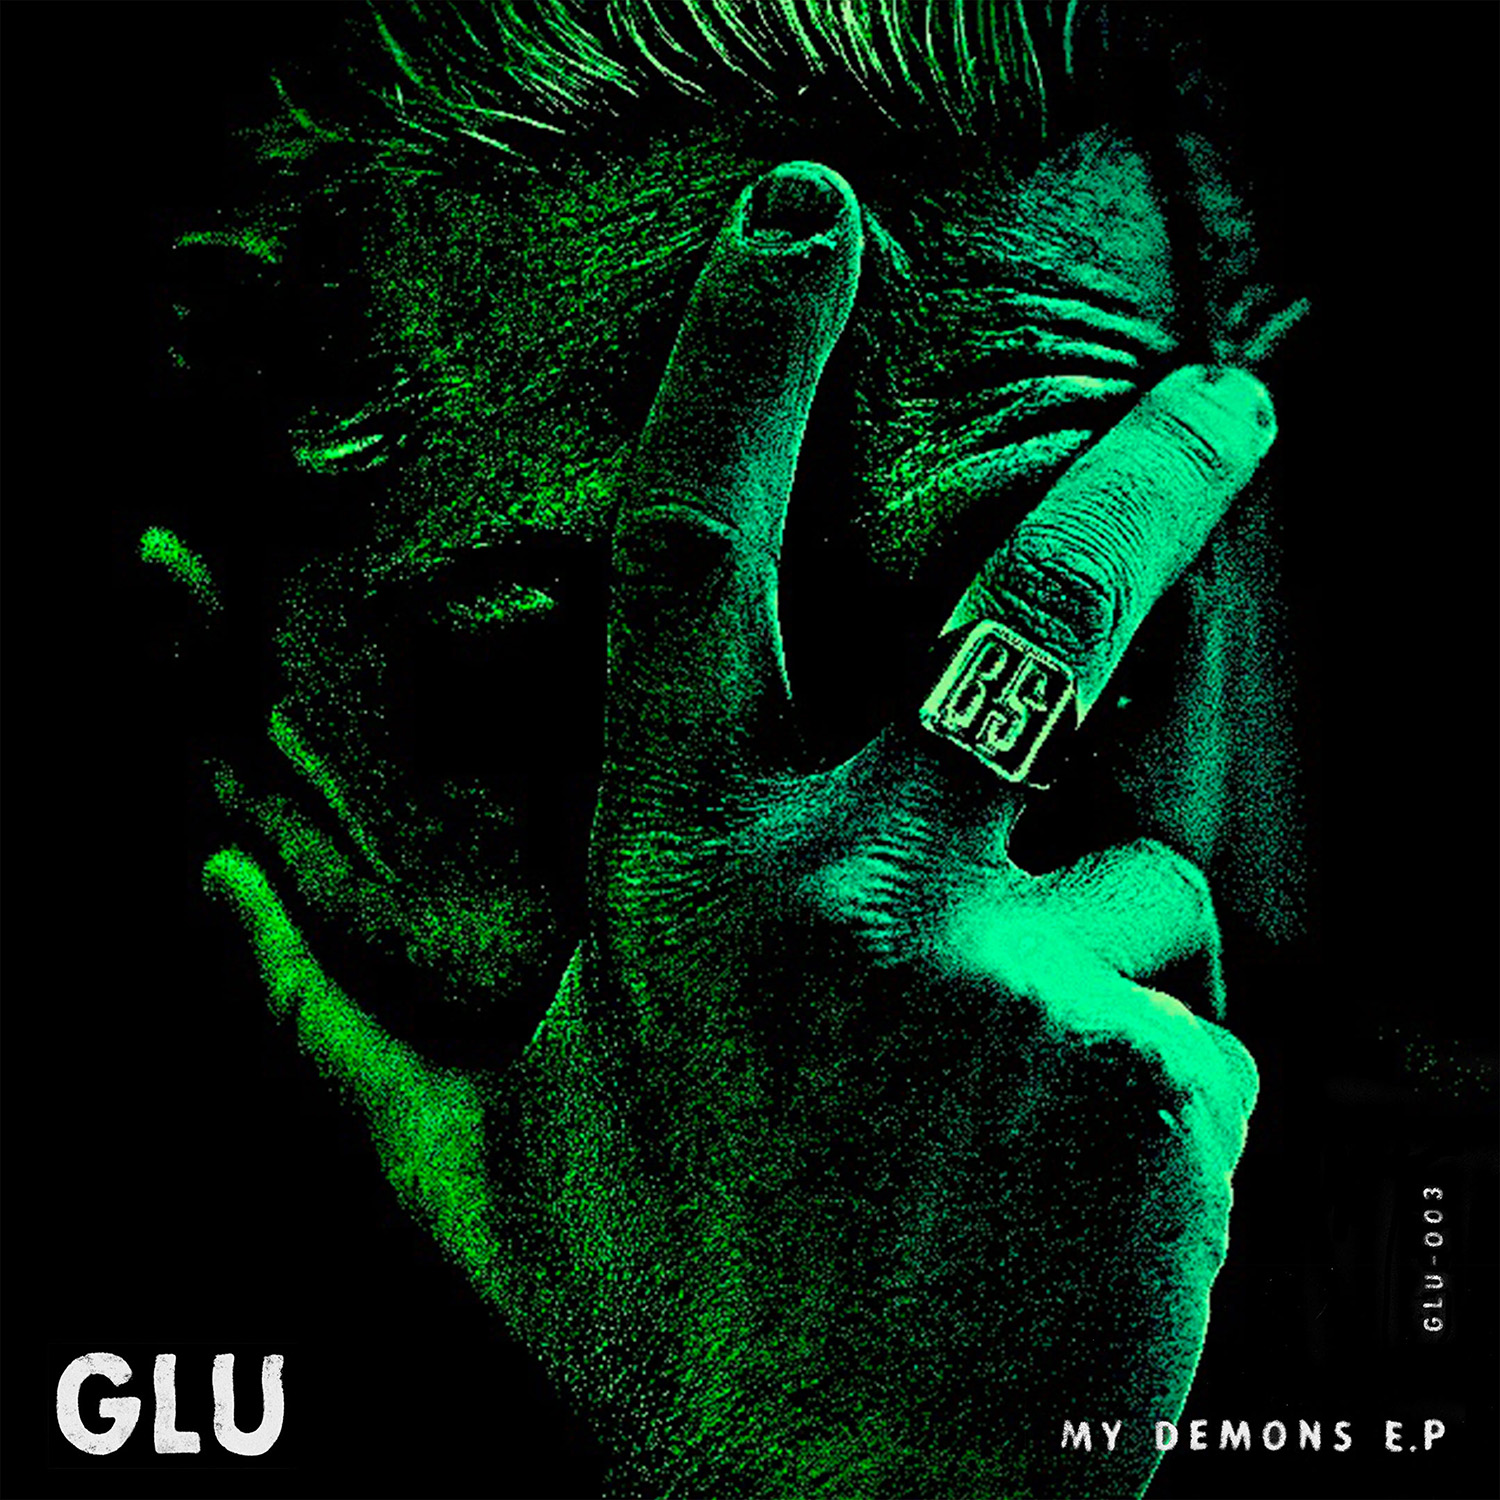 Artwork for ‘MY DEMONS’ EP by GLU